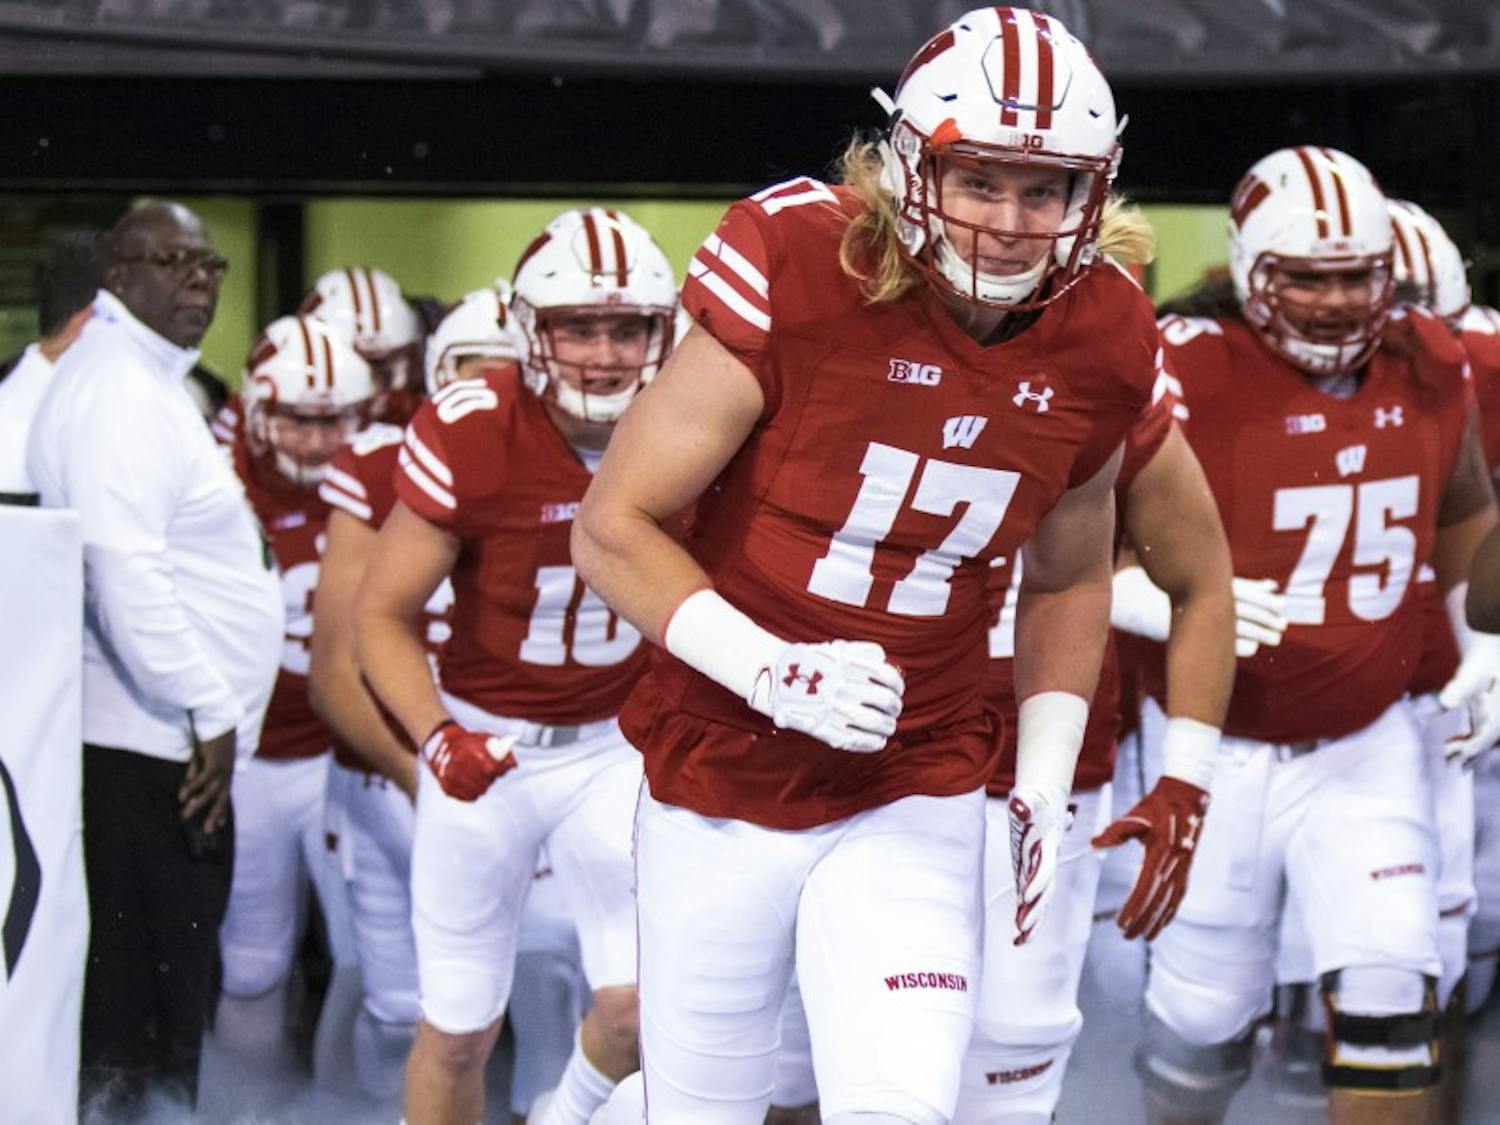 Senior outside linebacker Andrew Van Ginkel made eight tackles, forced a fumble and recorded a sack as part of a throwback performance from Wisconsin's defensive front.